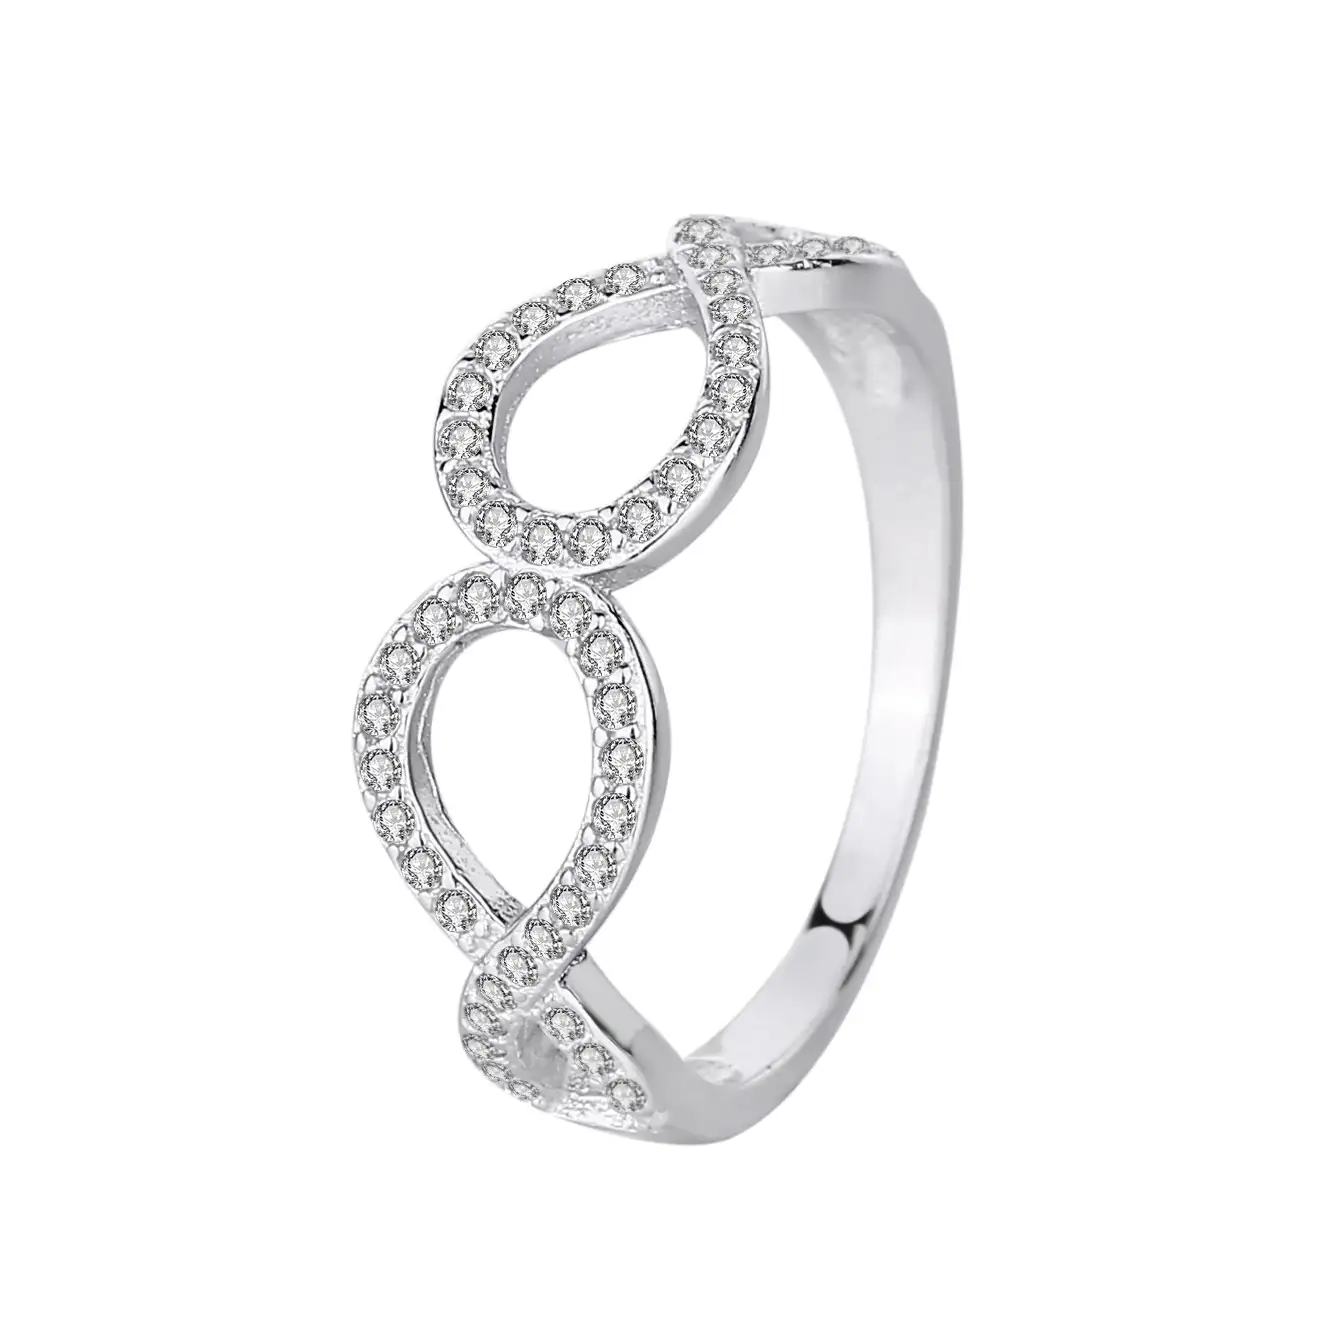 Silver Cubic Zirconia Infinity Band Ring 70100004